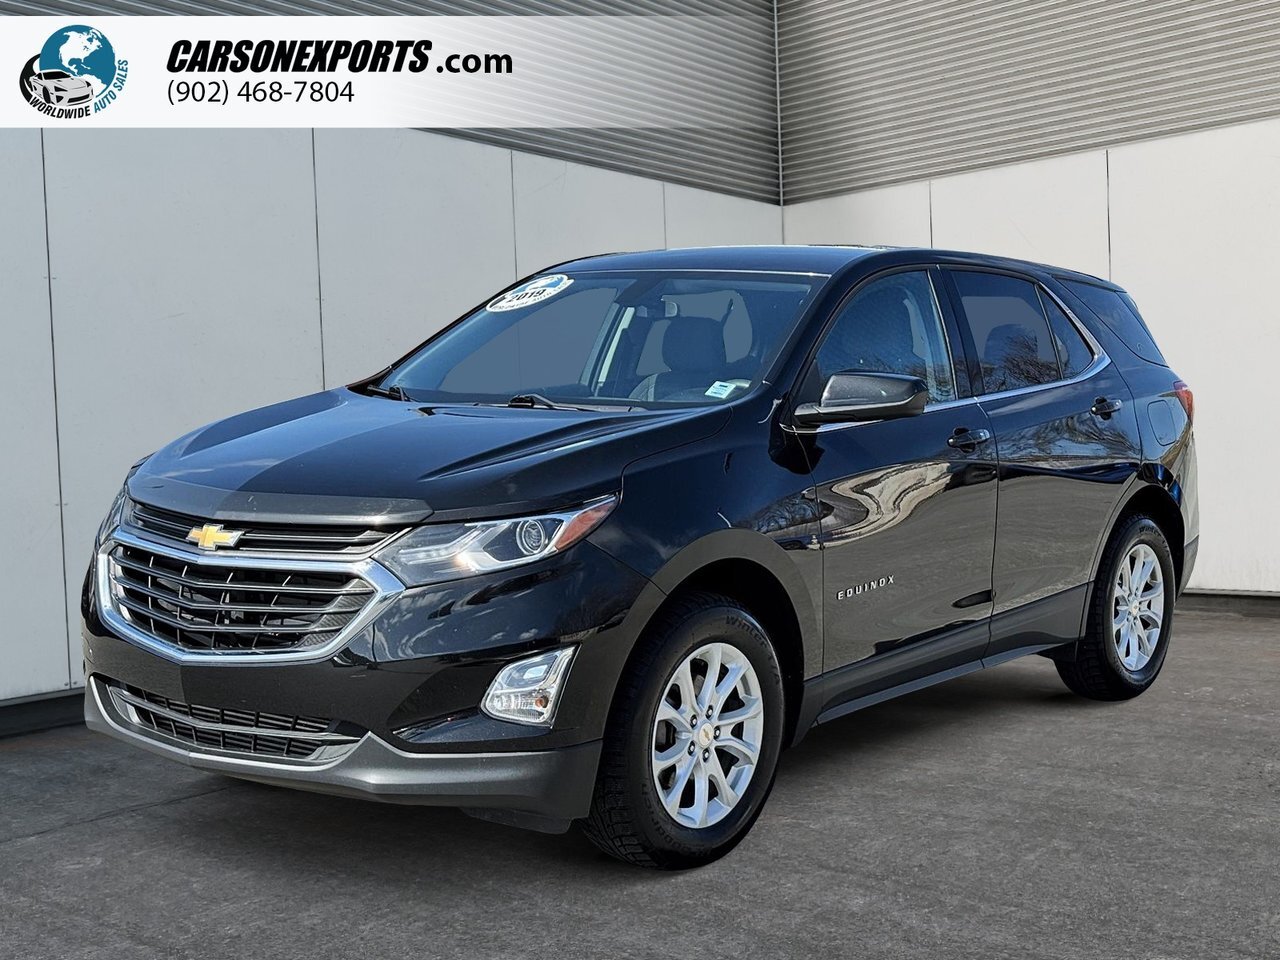 2019 Chevrolet Equinox LT The best place to buy a used car. Period.